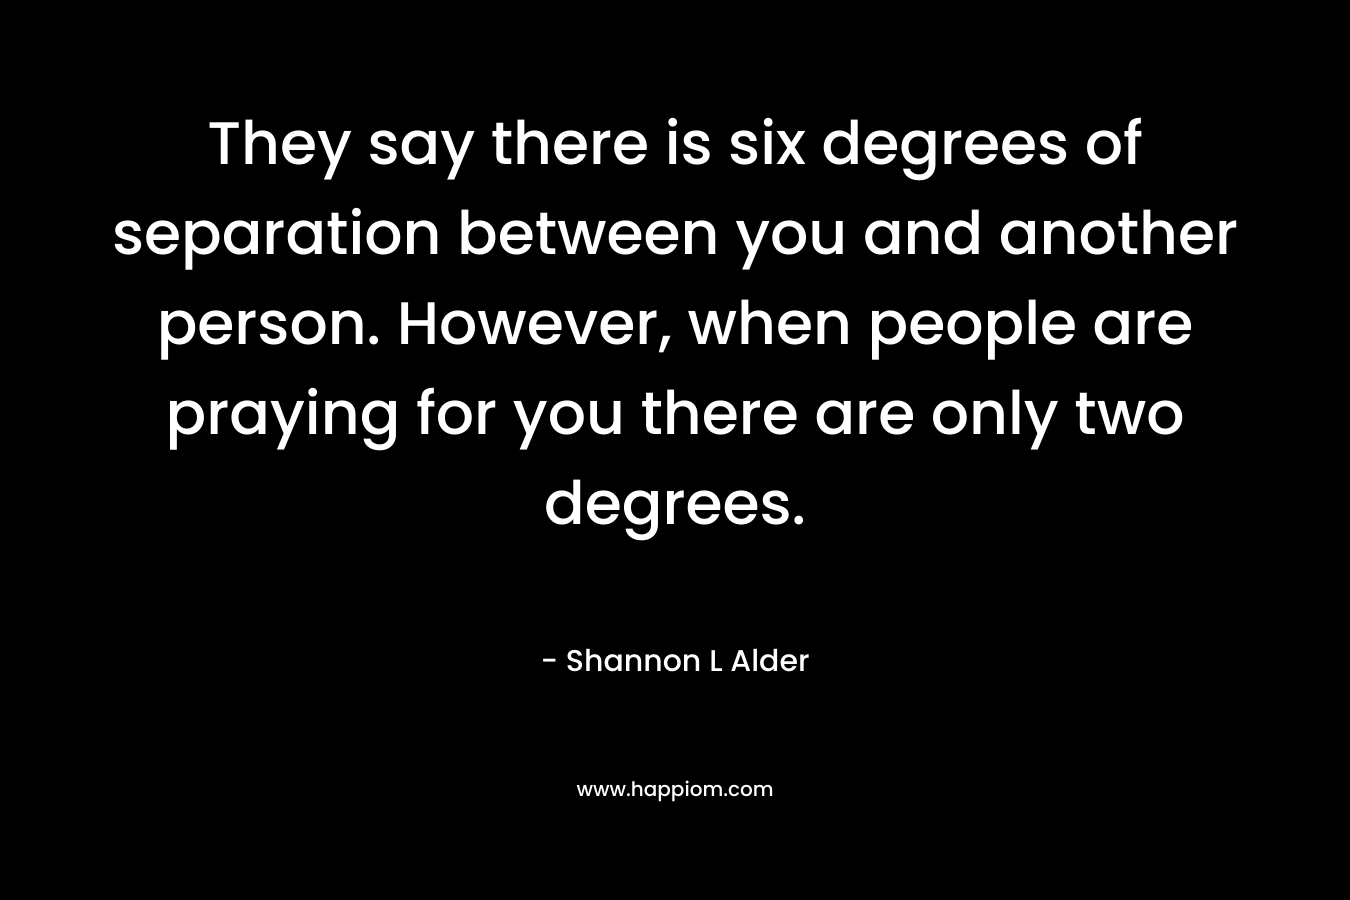 They say there is six degrees of separation between you and another person. However, when people are praying for you there are only two degrees.